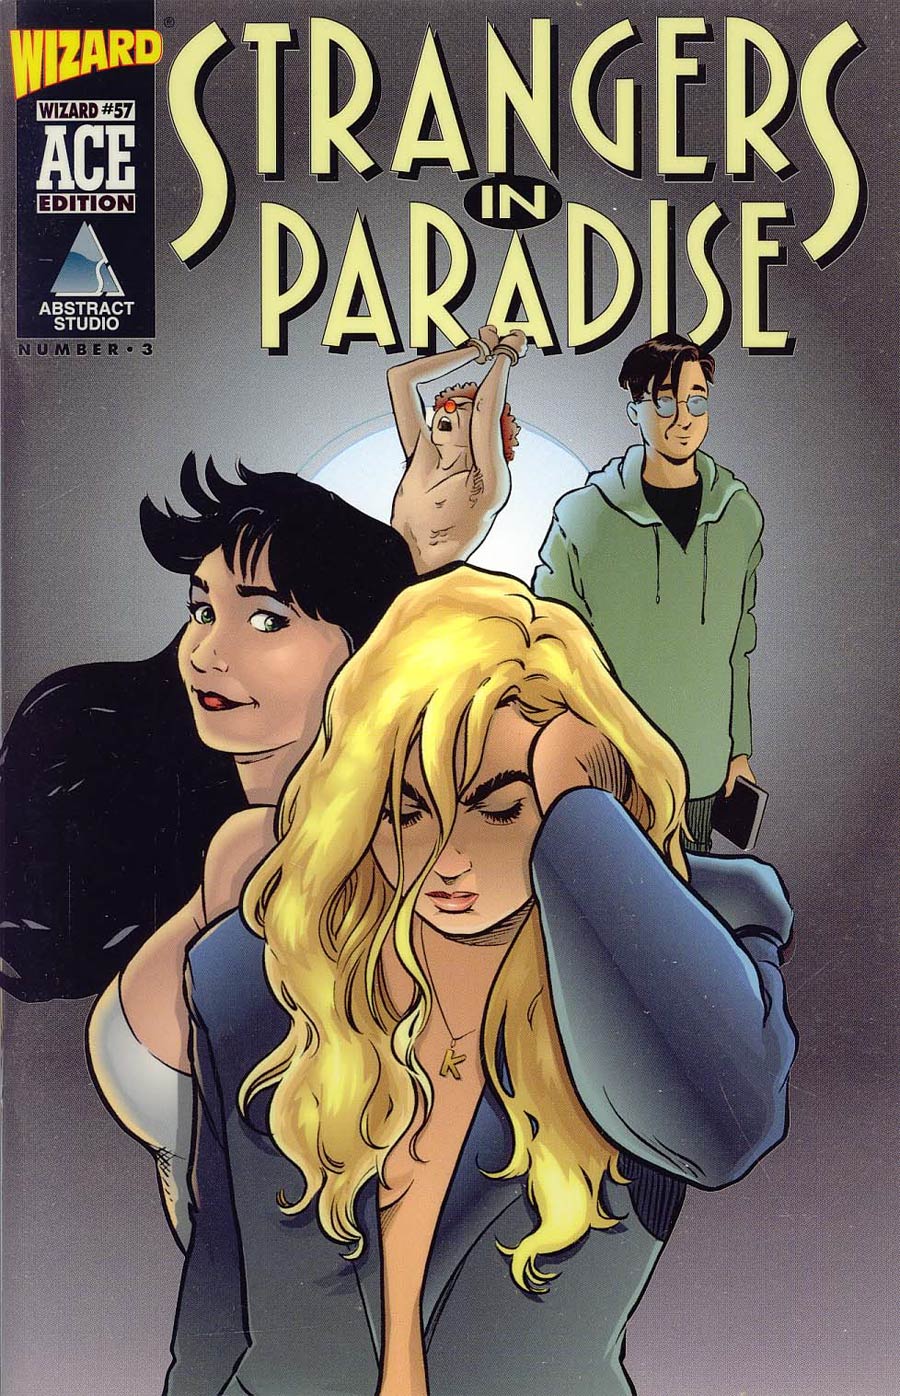 Strangers In Paradise #1 Cover D Wizard Ace Edition